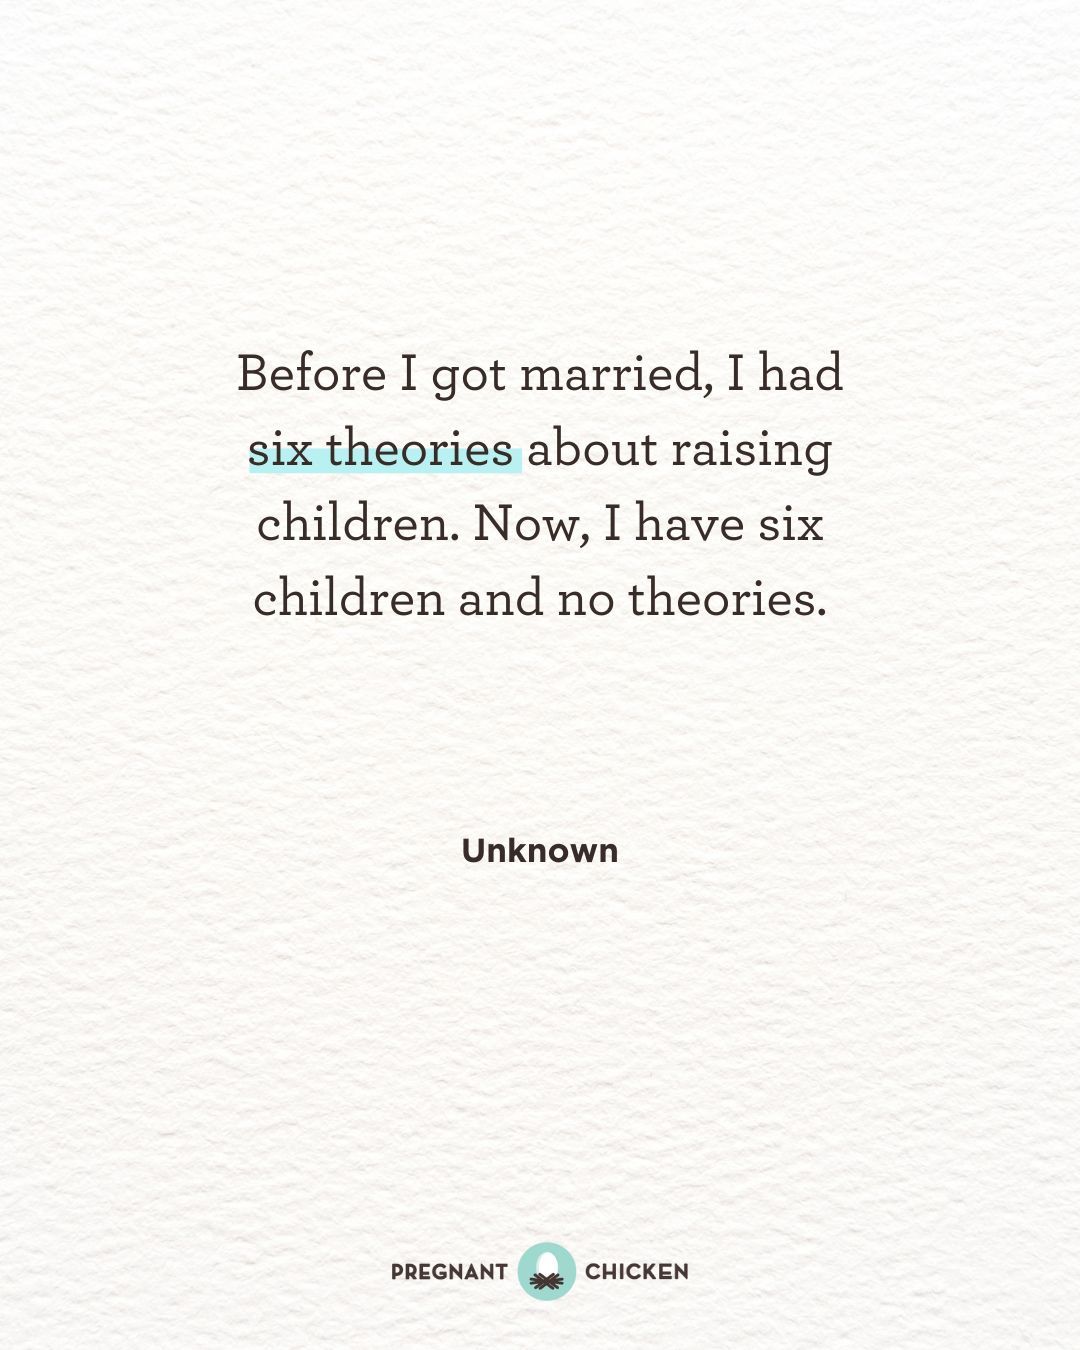 Before I got married, I had six theories about raising children. Now, I have six children and no theories.